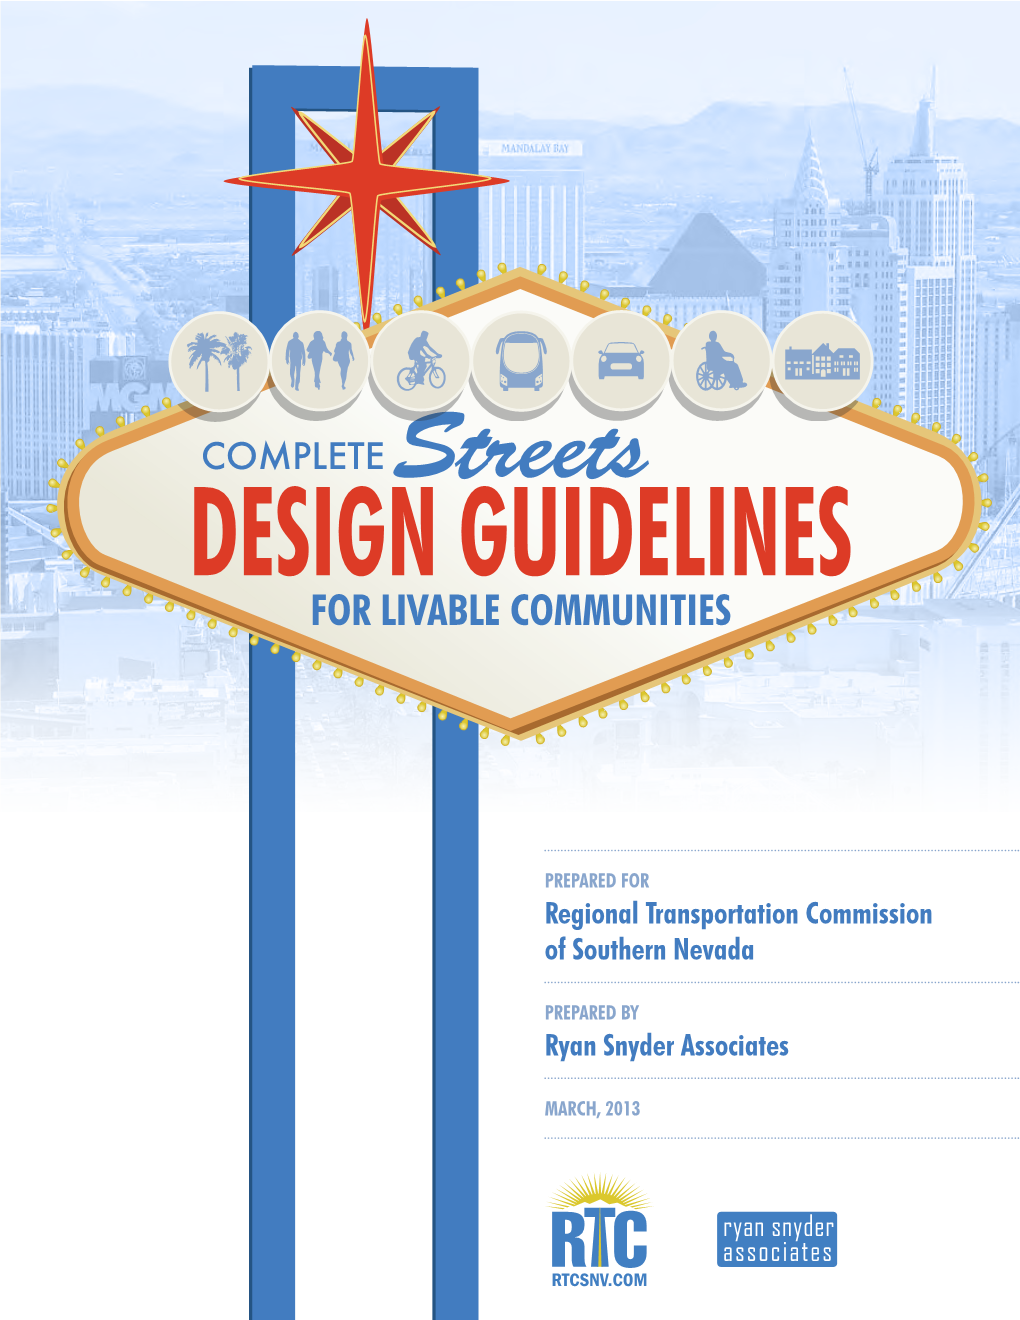 COMPLETE Streets DESIGN GUIDELINES for LIVABLE COMMUNITIES